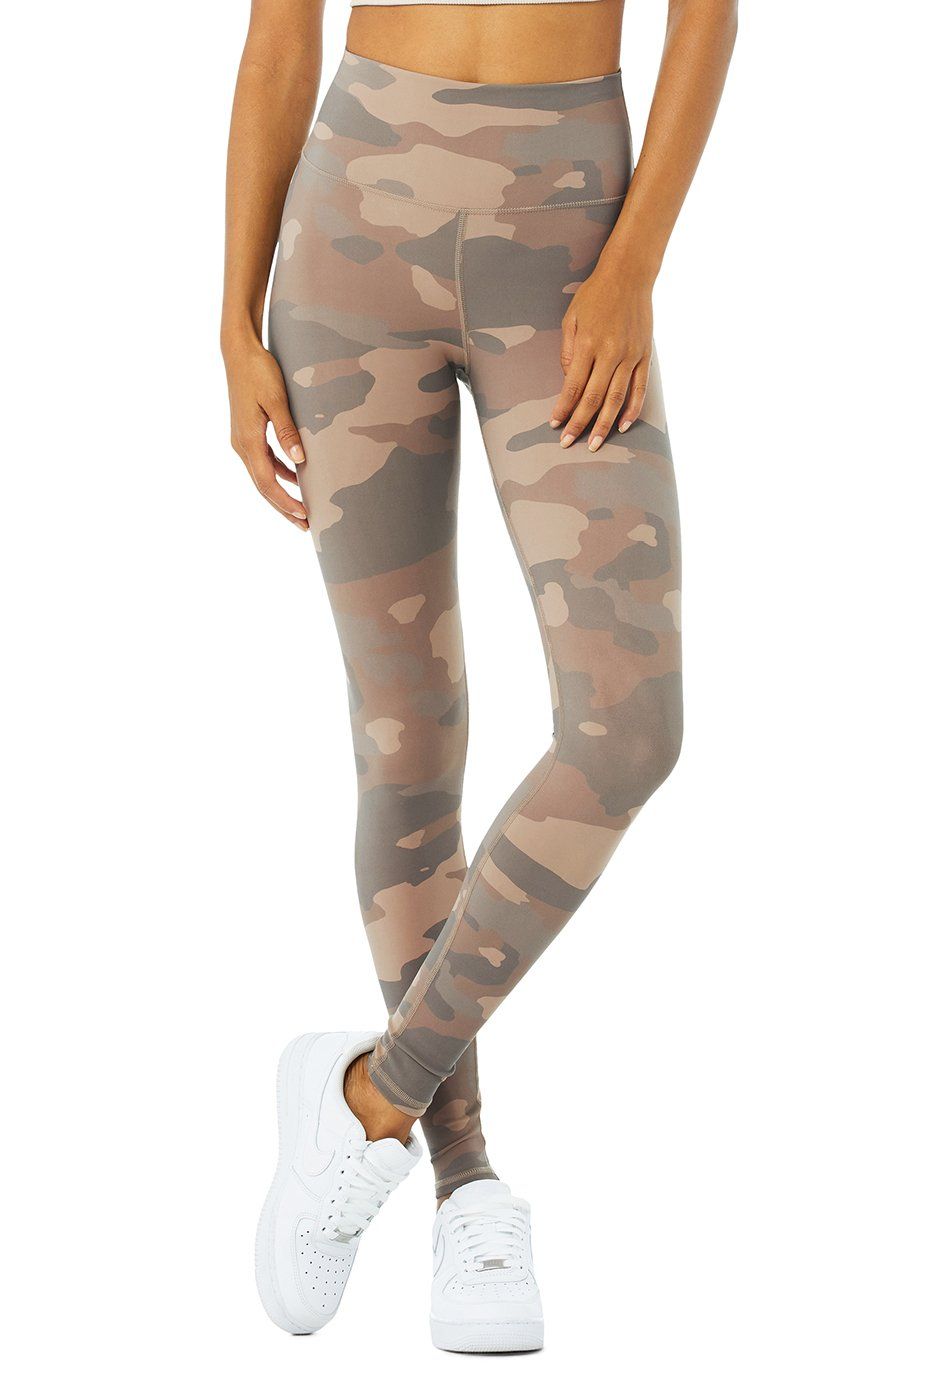 Alo Yoga Alo Cropped Space Dye Leggings Size XS - $20 - From Crissi